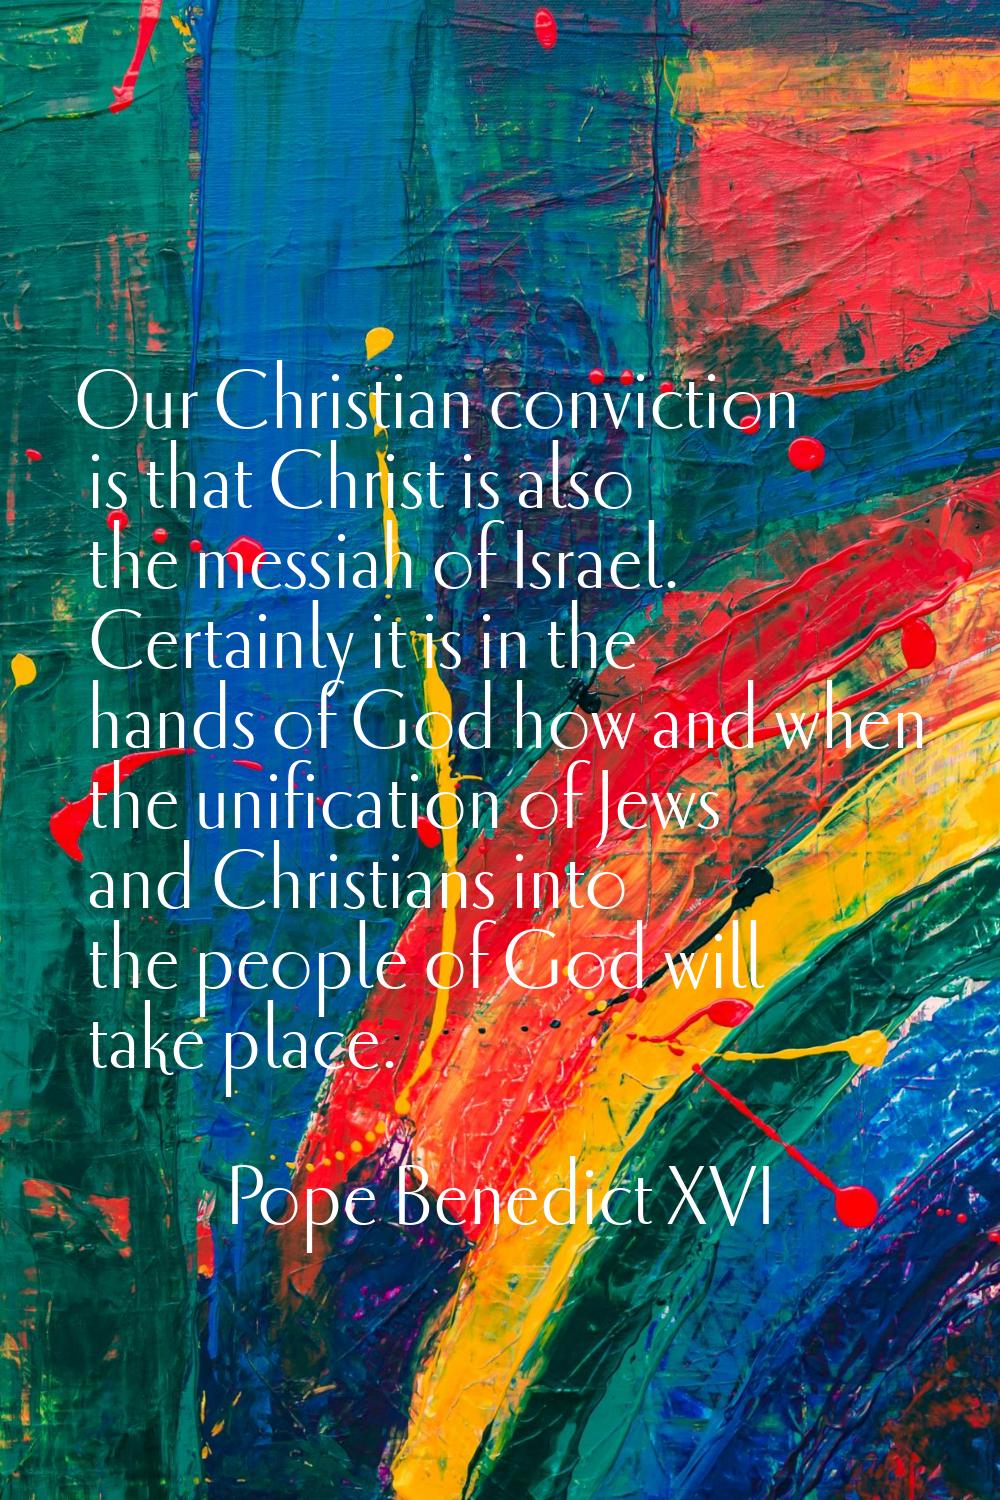 Our Christian conviction is that Christ is also the messiah of Israel. Certainly it is in the hands